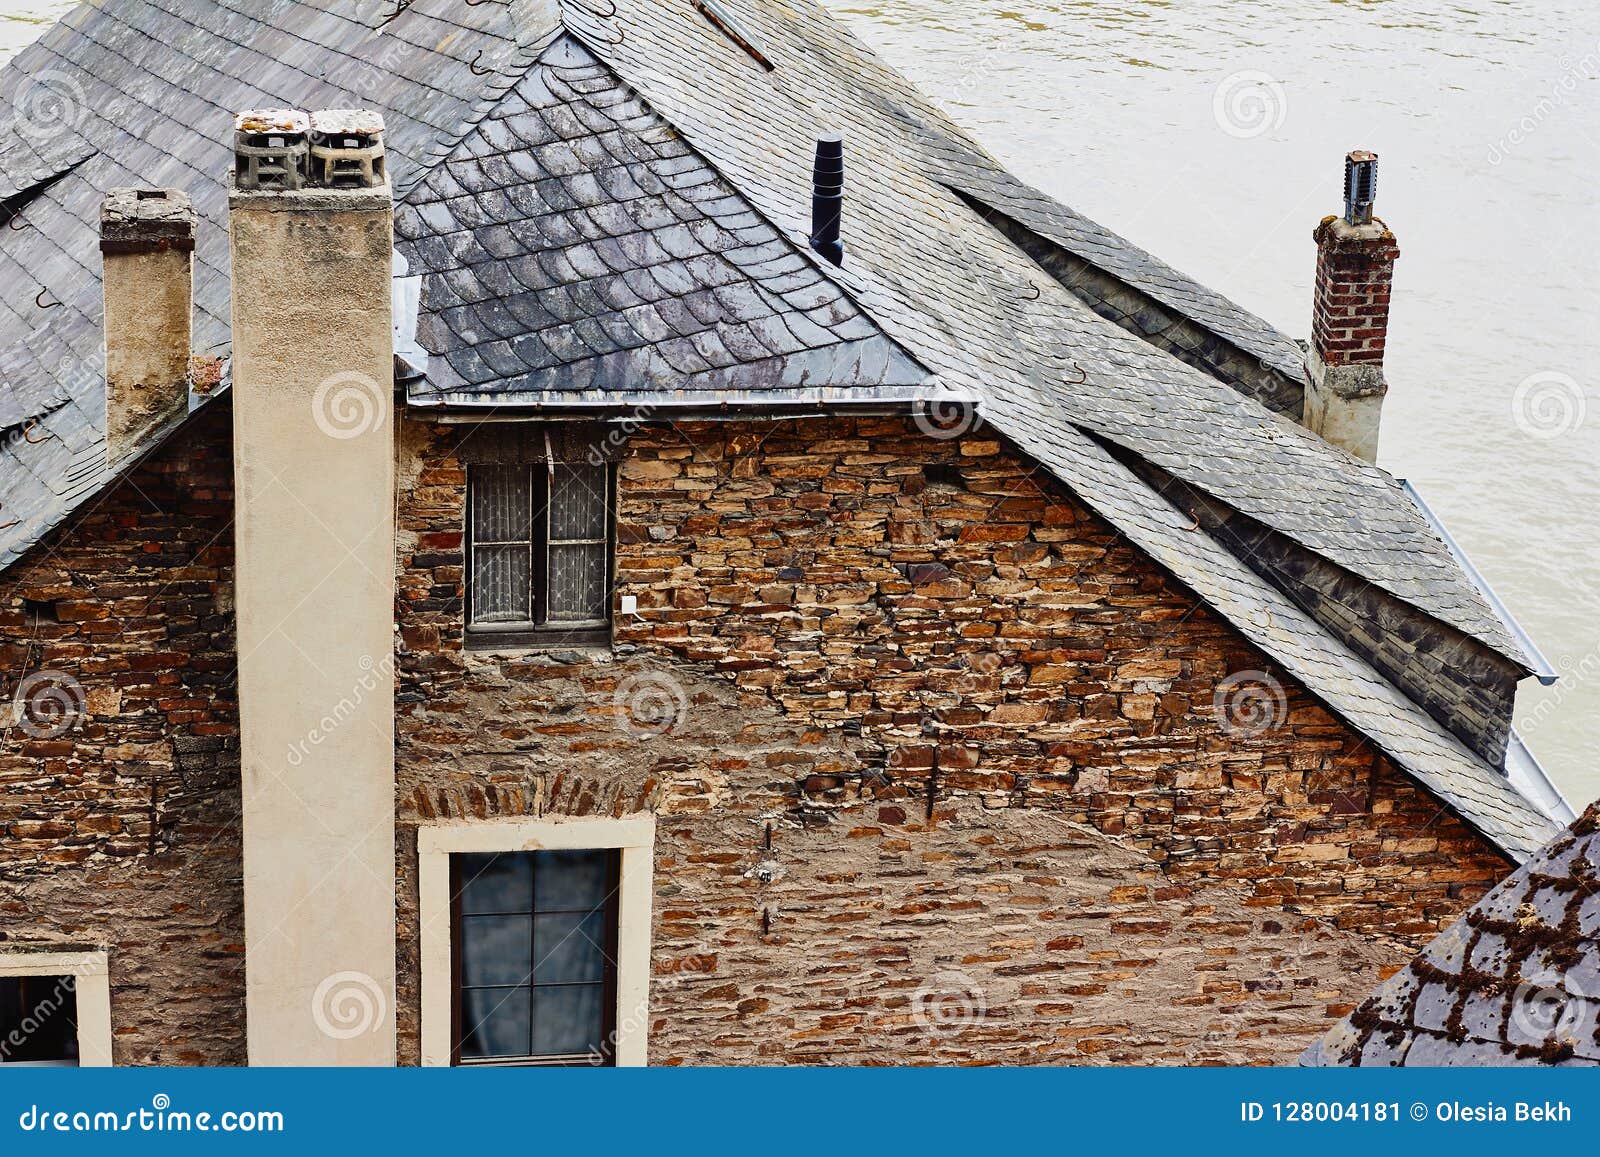 Top View of Tiled Roof of Medieval House Stock Image - Image of ancient